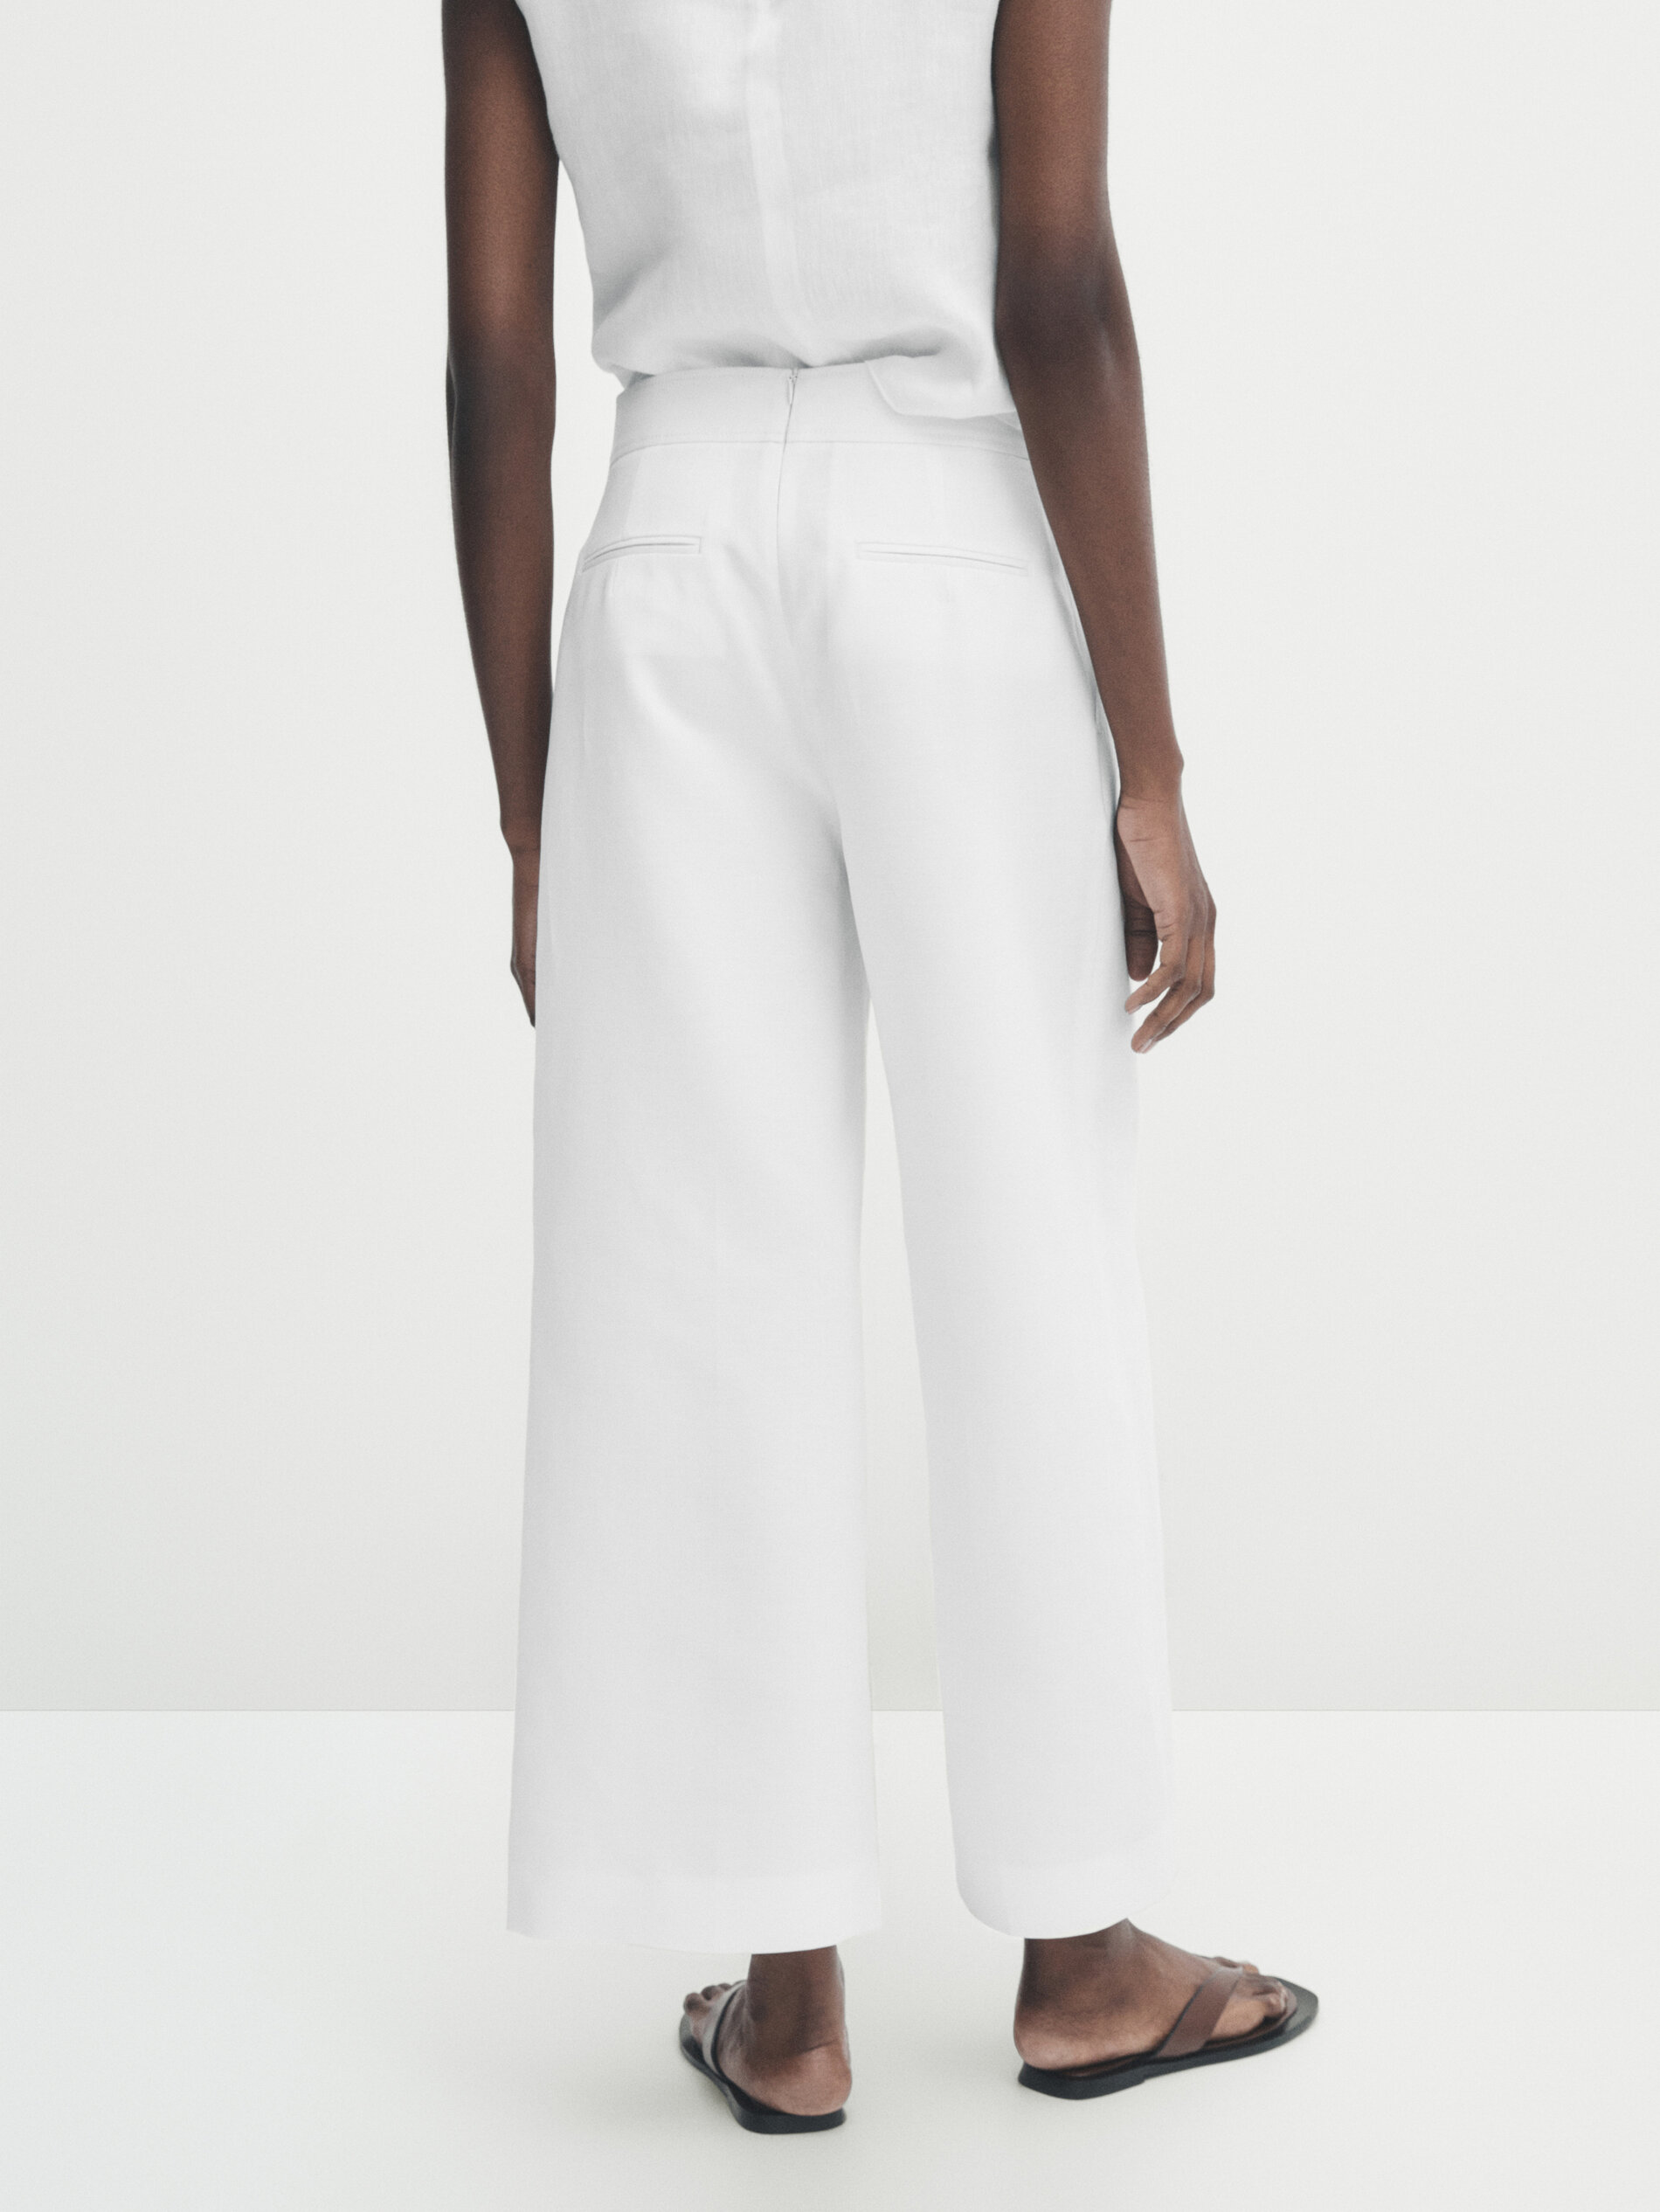 Missguided cheesecloth bardot top and wide leg trouser set in white  ASOS